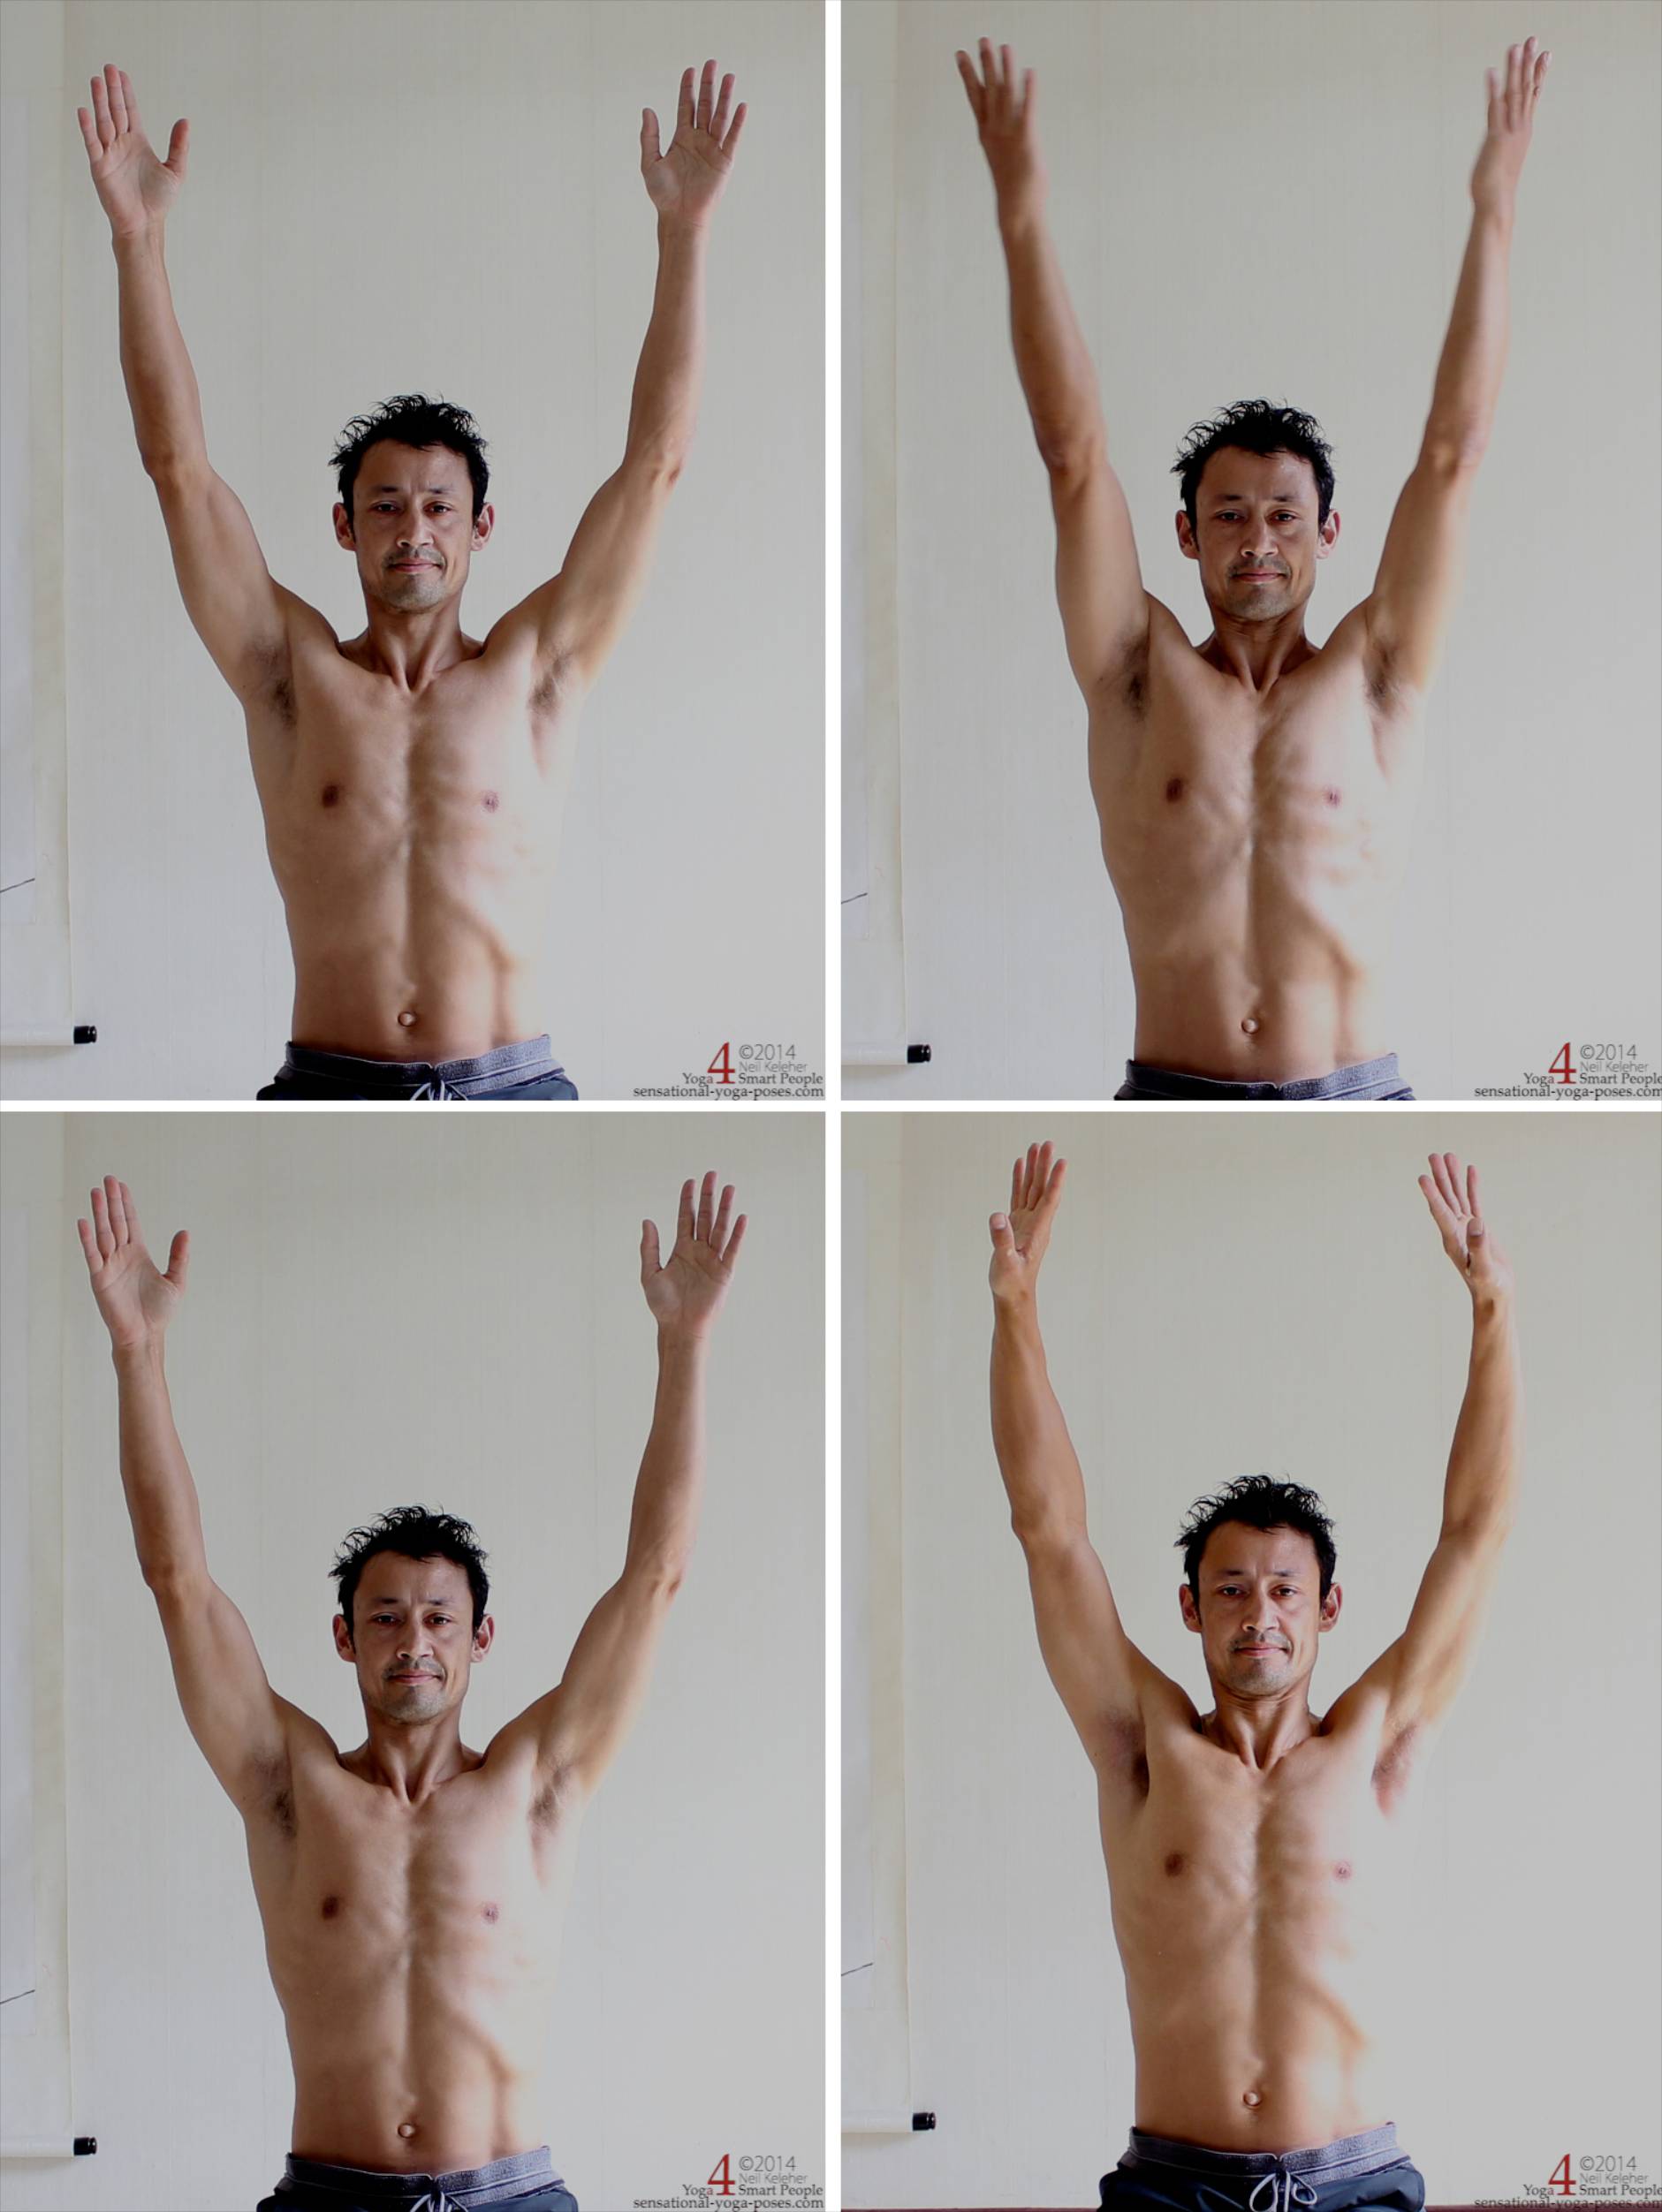 Arms Up: 1. Neutral. 2. Externally rotated. 3. Neutral. 4. Internally rotated.